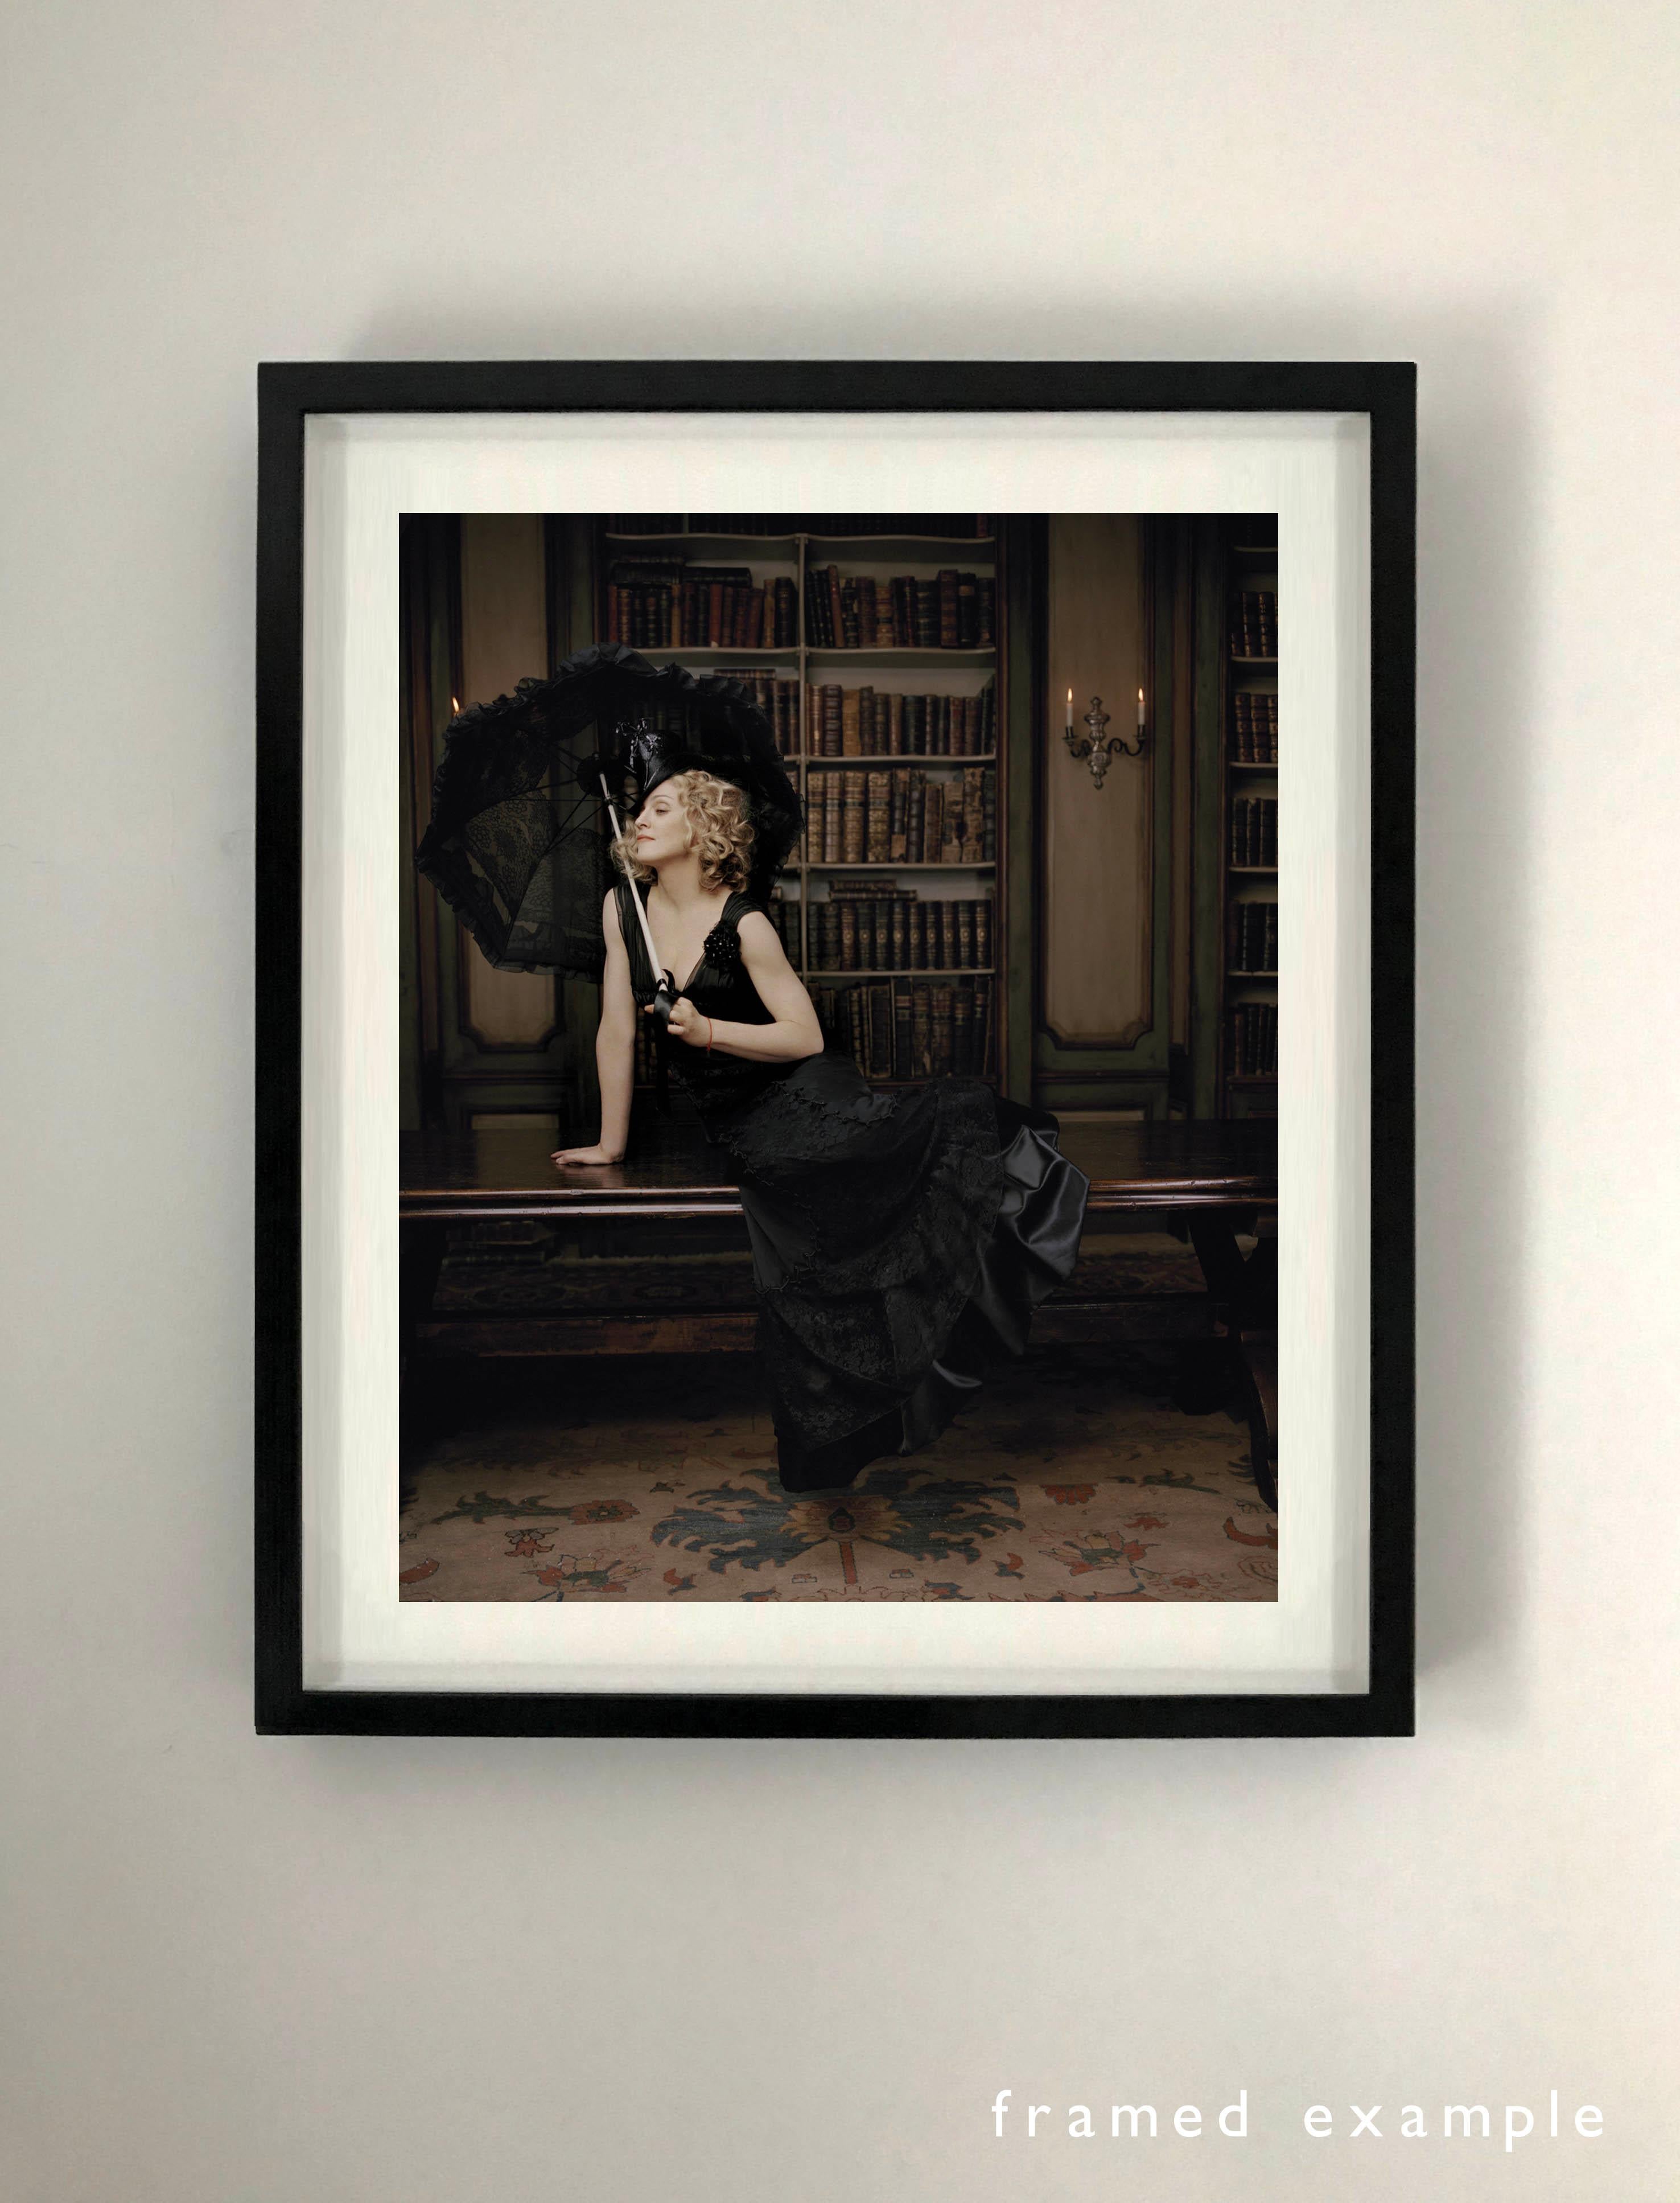 Lorenzo Agius (b.1962)
Madonna in the Library
2005
digital C-Type print
60 x 48 in. / 40 x 30 in. / 24 x 20 in.
signed and numbered
printed later

This work is available in the following sizes (paper size):
24 x 20 in., edition of 25 + 2 AP, £3,960